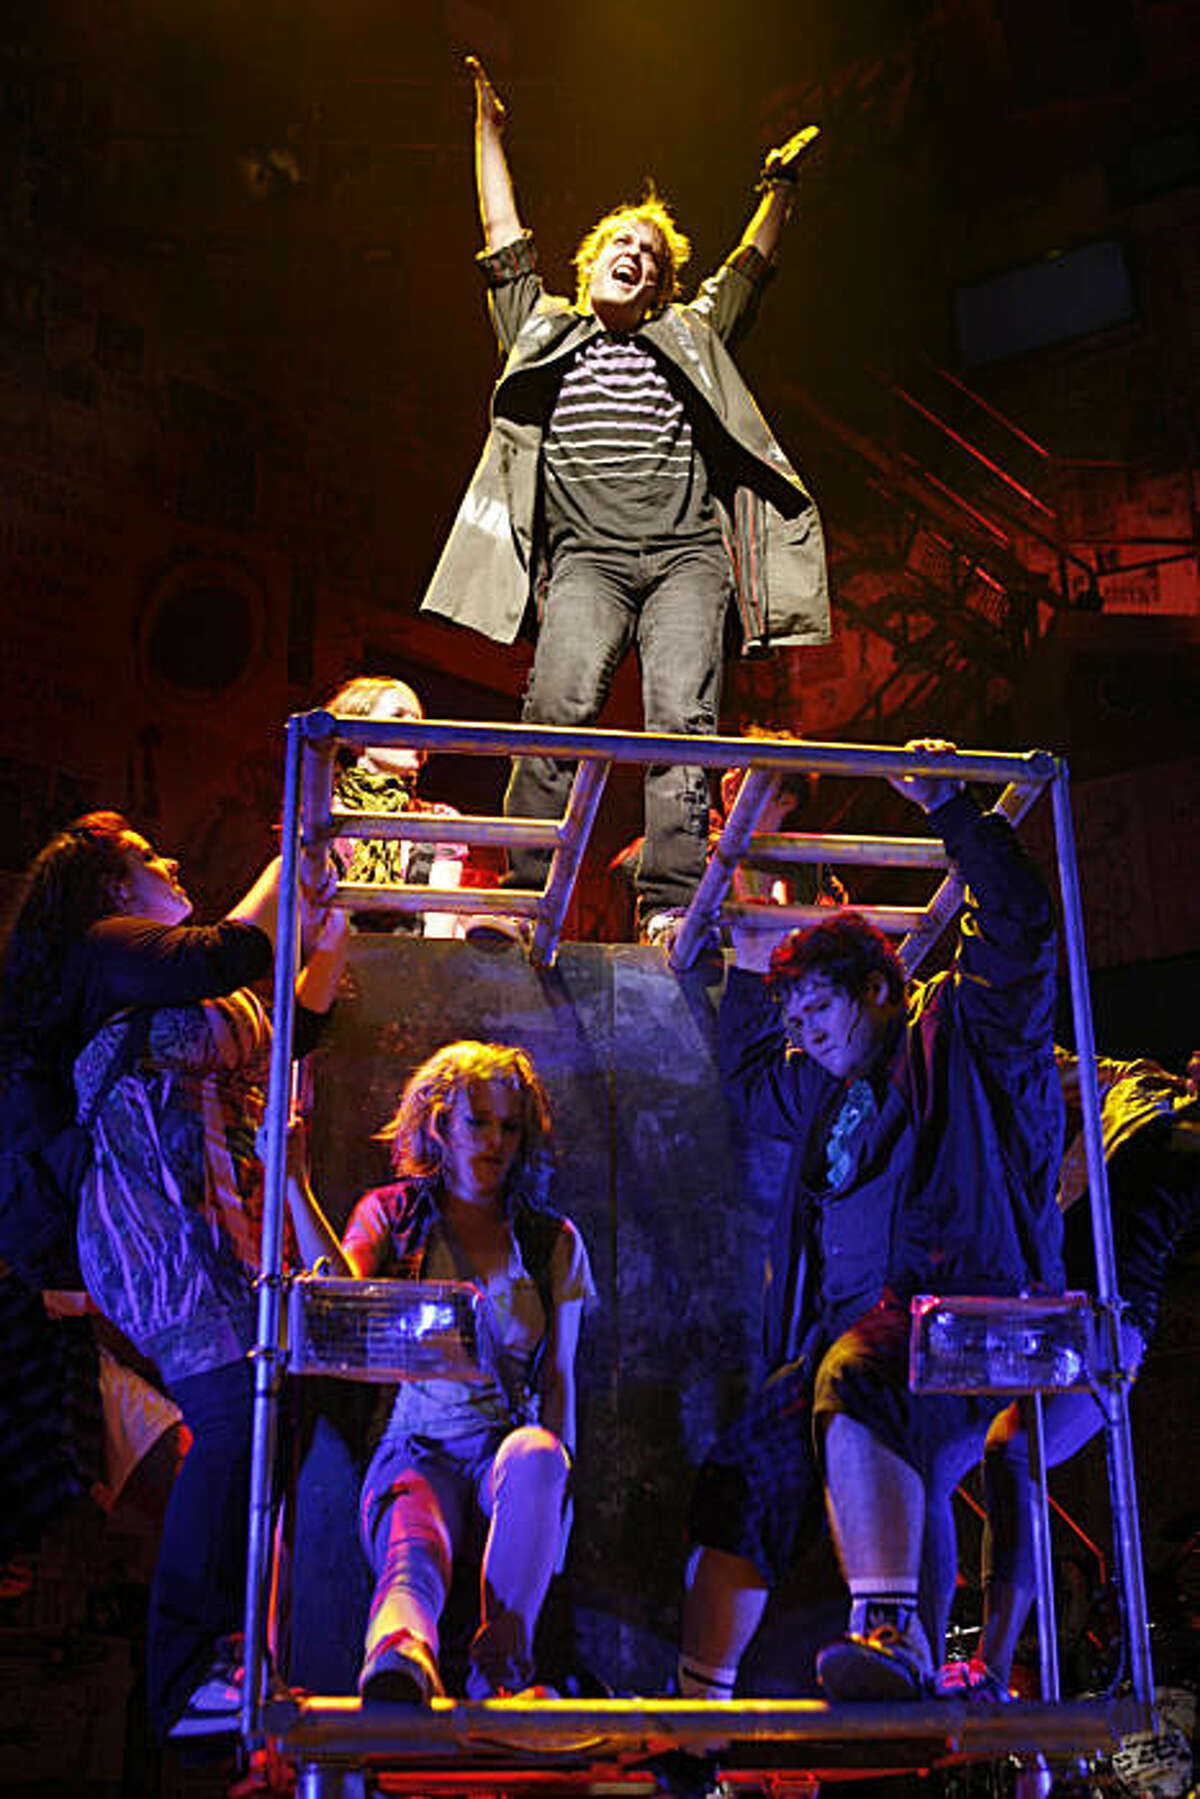 Final dress rehearsal for Berkeley Rep's Roda Theatre world premiere of "American Idiot, " a new musical adaptation of Green Day's album of same name, directed by Michael Mayer in Berkeley, Calif., on Thursday, September 3, 2009.